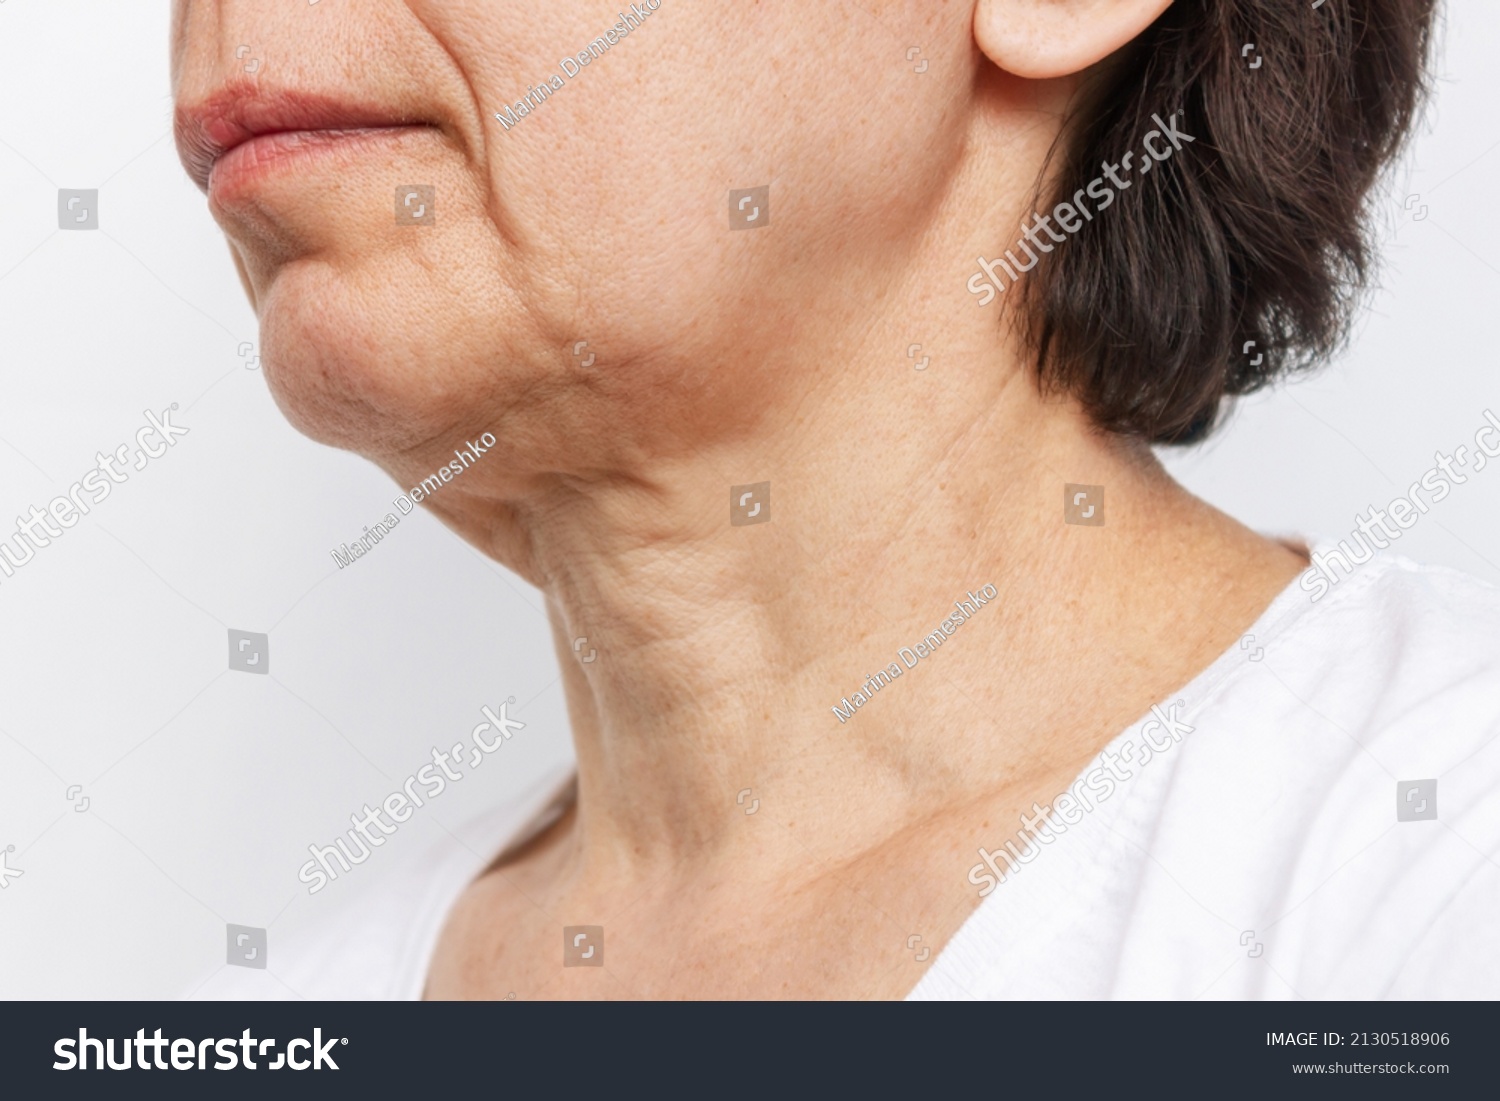 The lower part of elderly woman's face and neck with signs of skin aging isolated on a white background. Age-related changes, flabby sagging facial skin. Cosmetology and beauty concept #2130518906